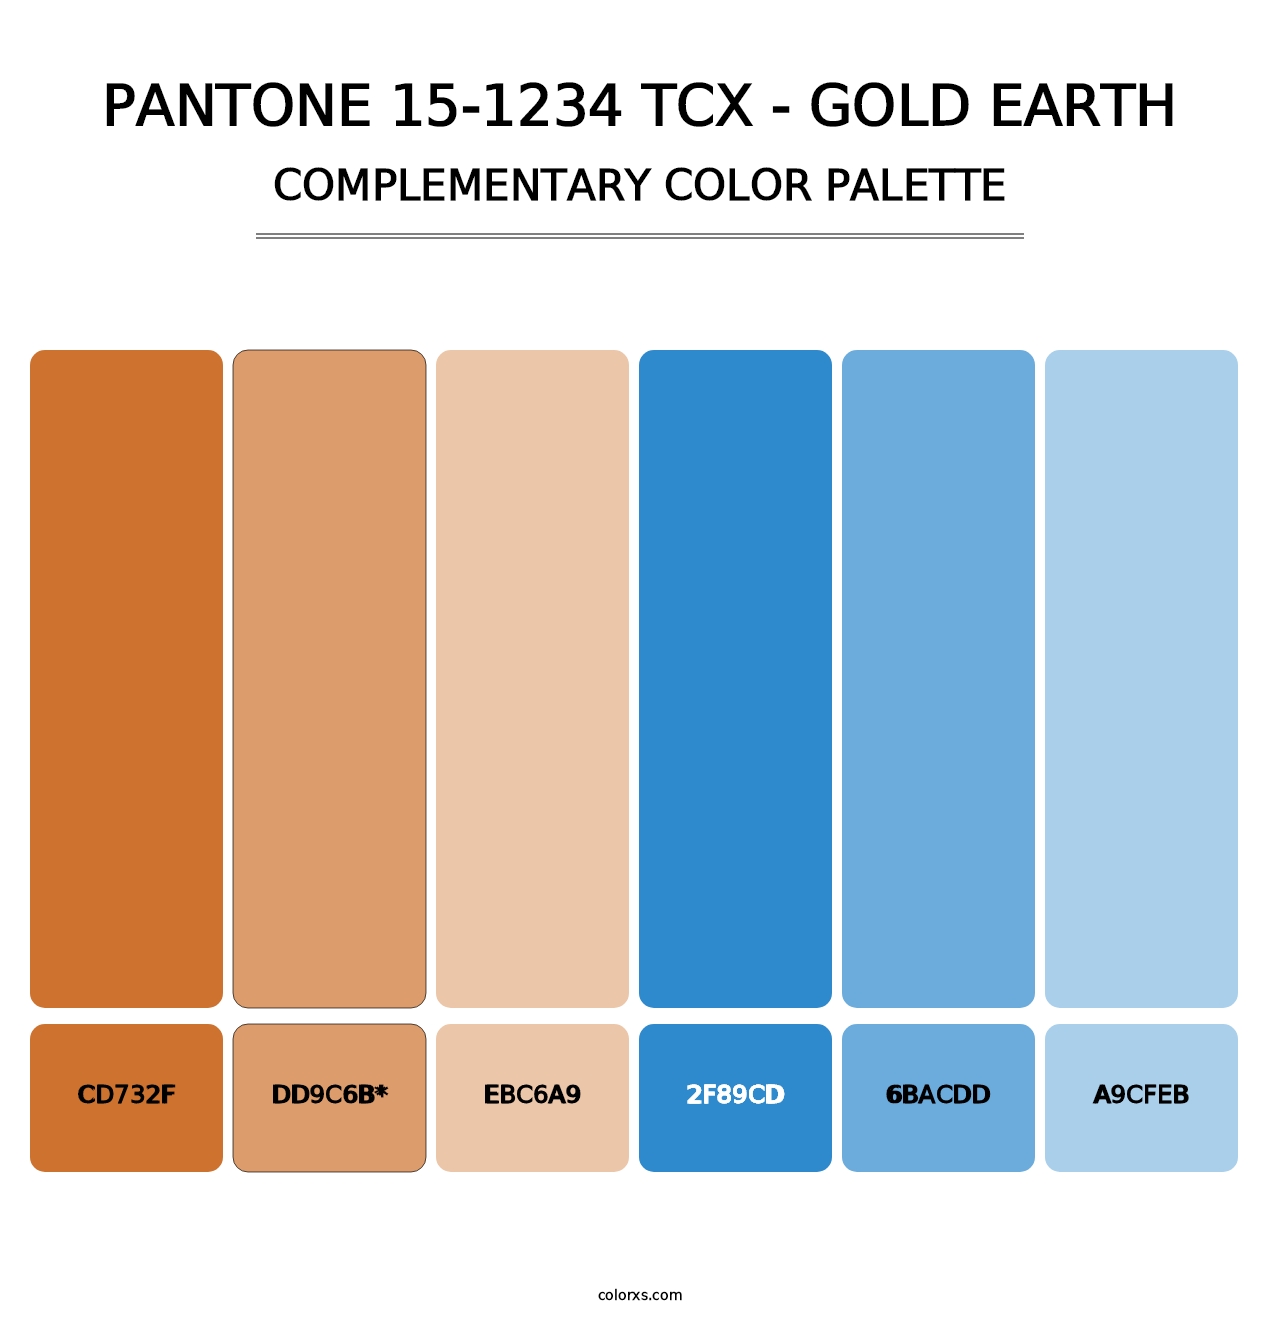 PANTONE 15-1234 TCX - Gold Earth - Complementary Color Palette